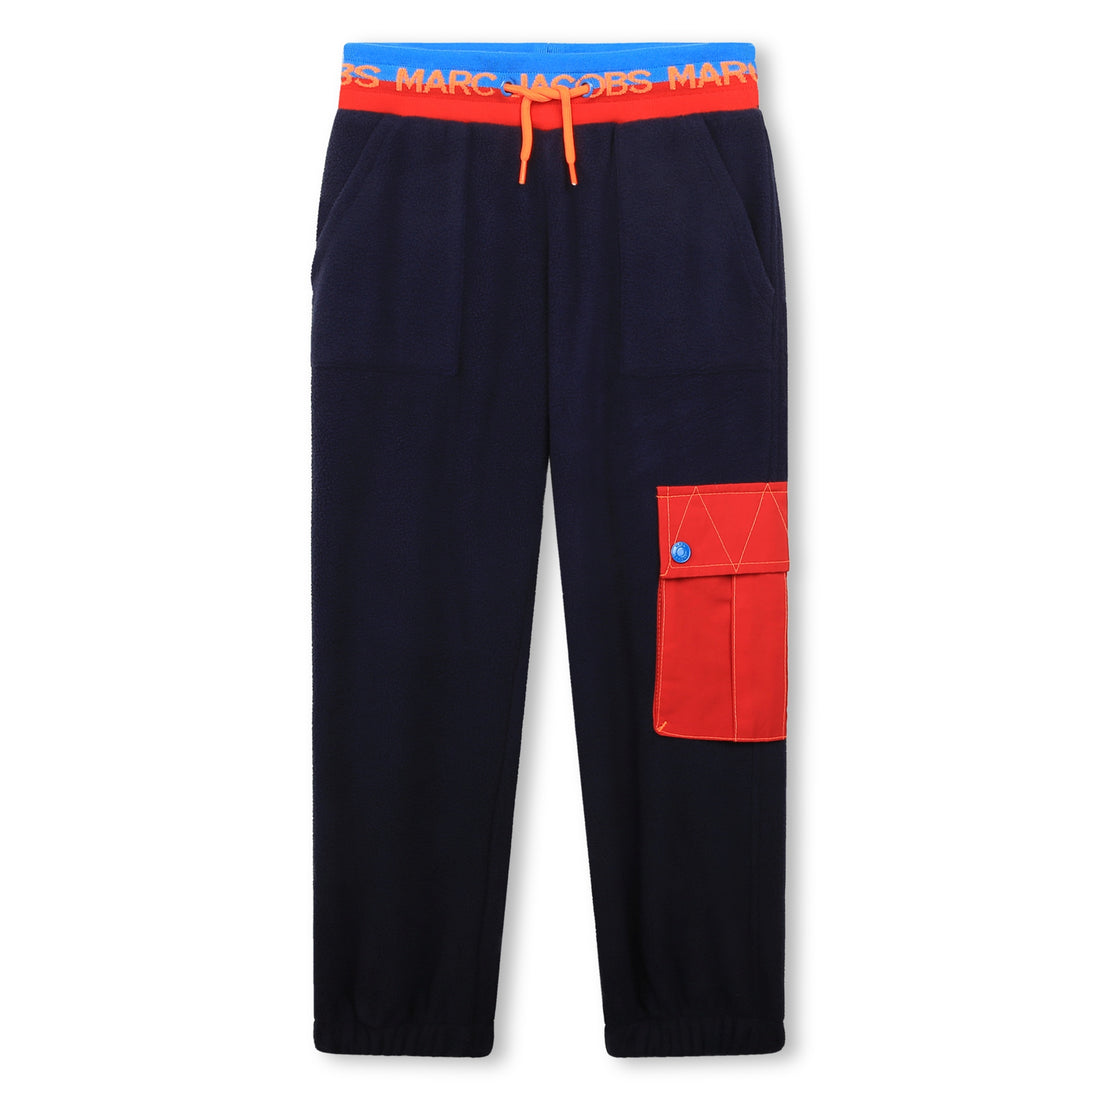 The Marc Jacobs Jogging Bottoms Style: W24293